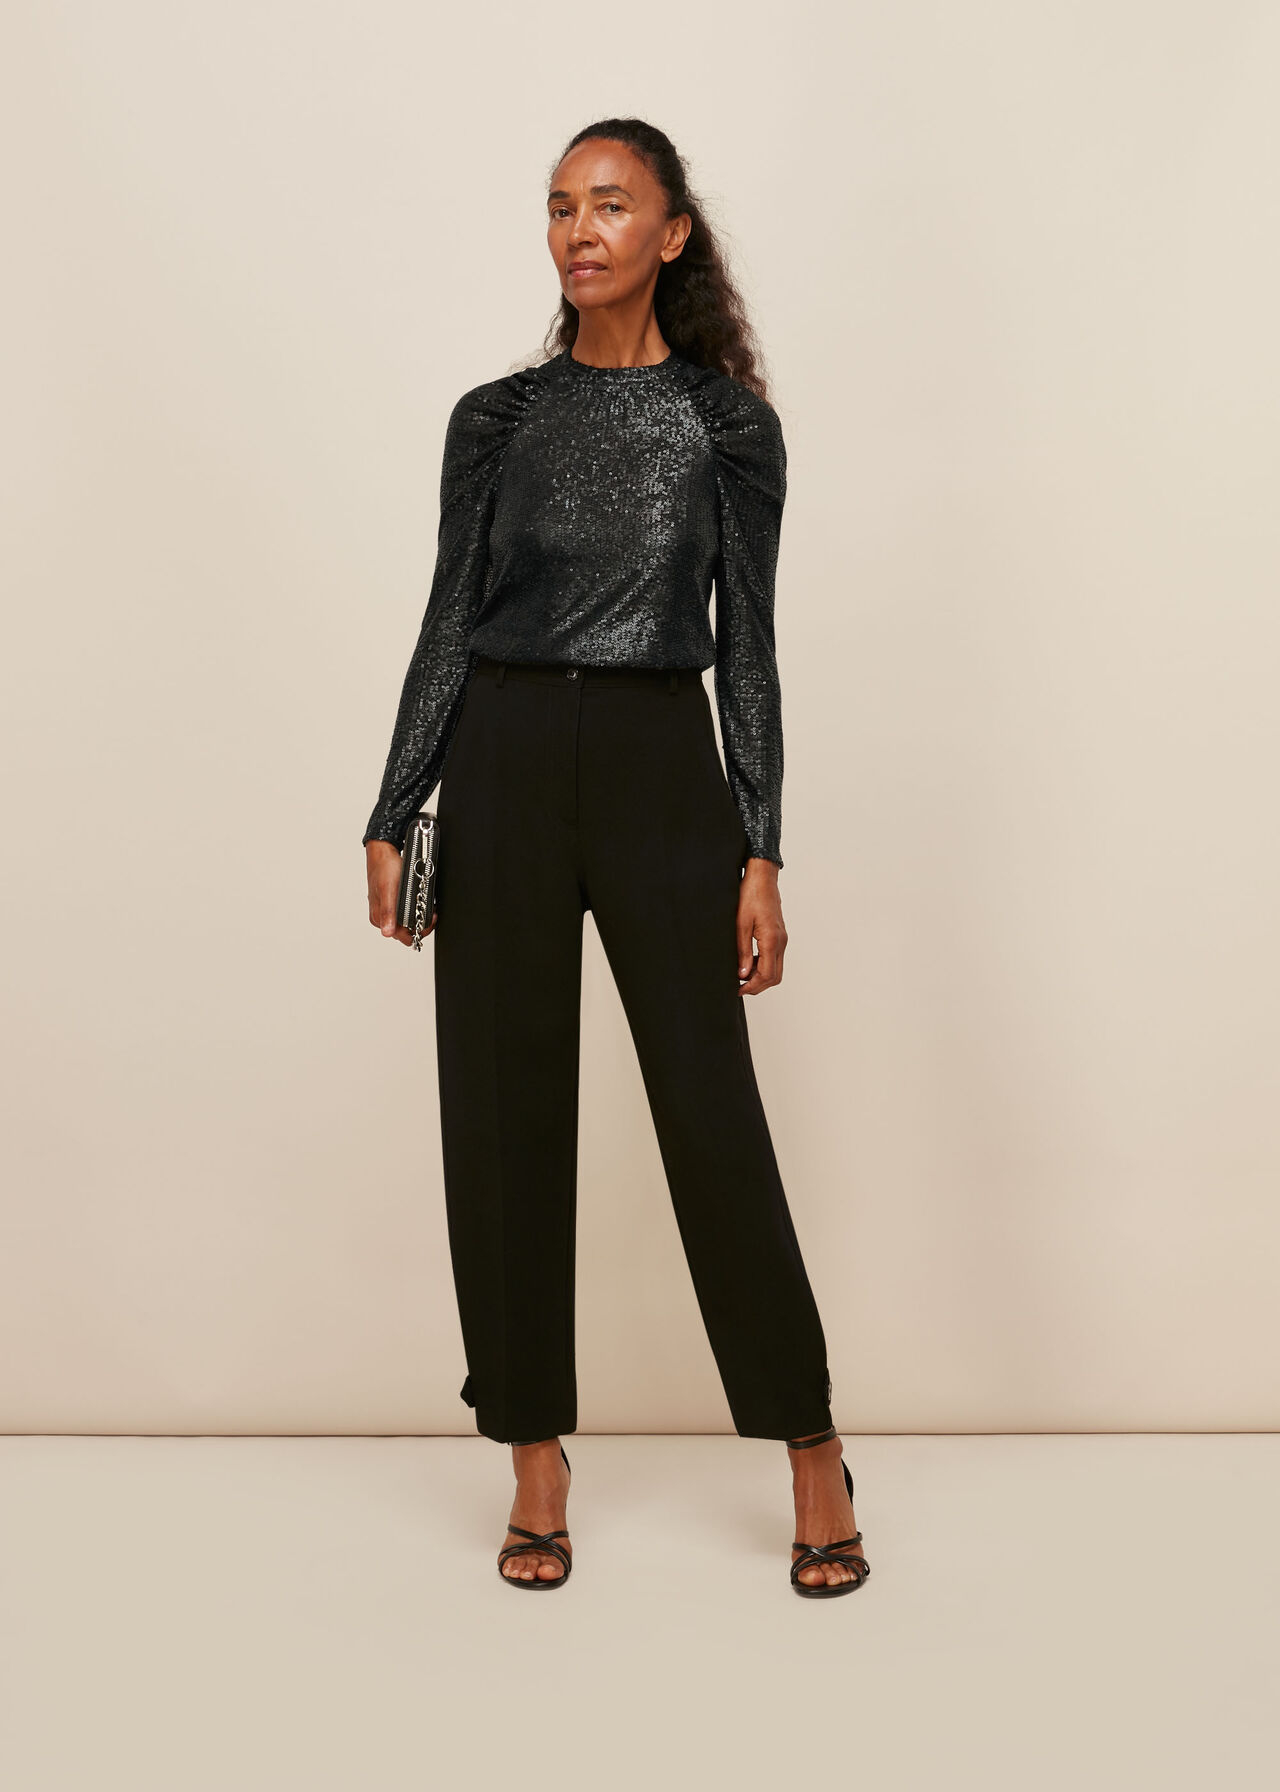 Black Sequin Long Sleeve Top | WHISTLES